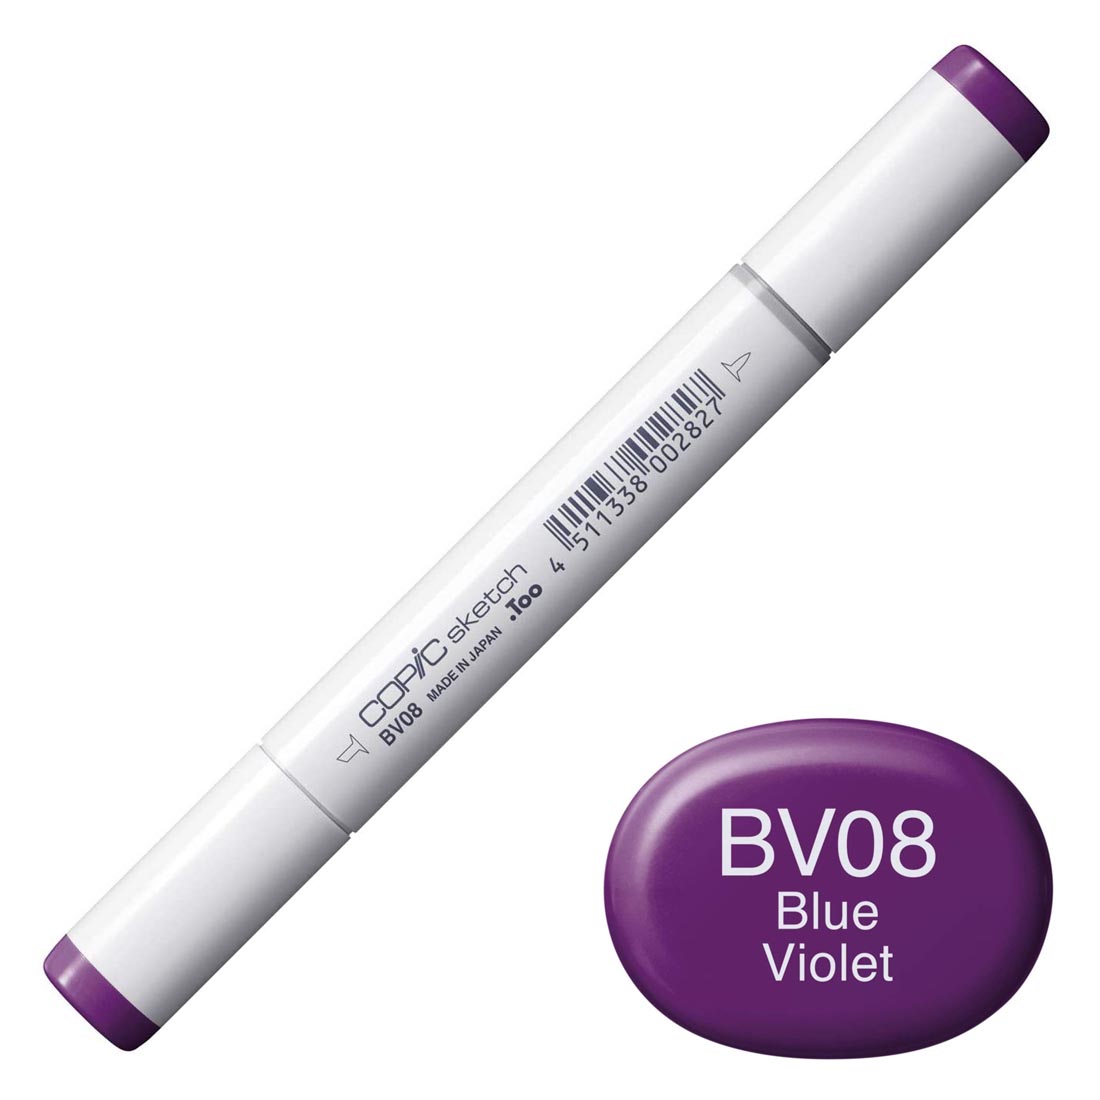 COPIC Sketch Marker with a color swatch and text of BV08 Blue Violet